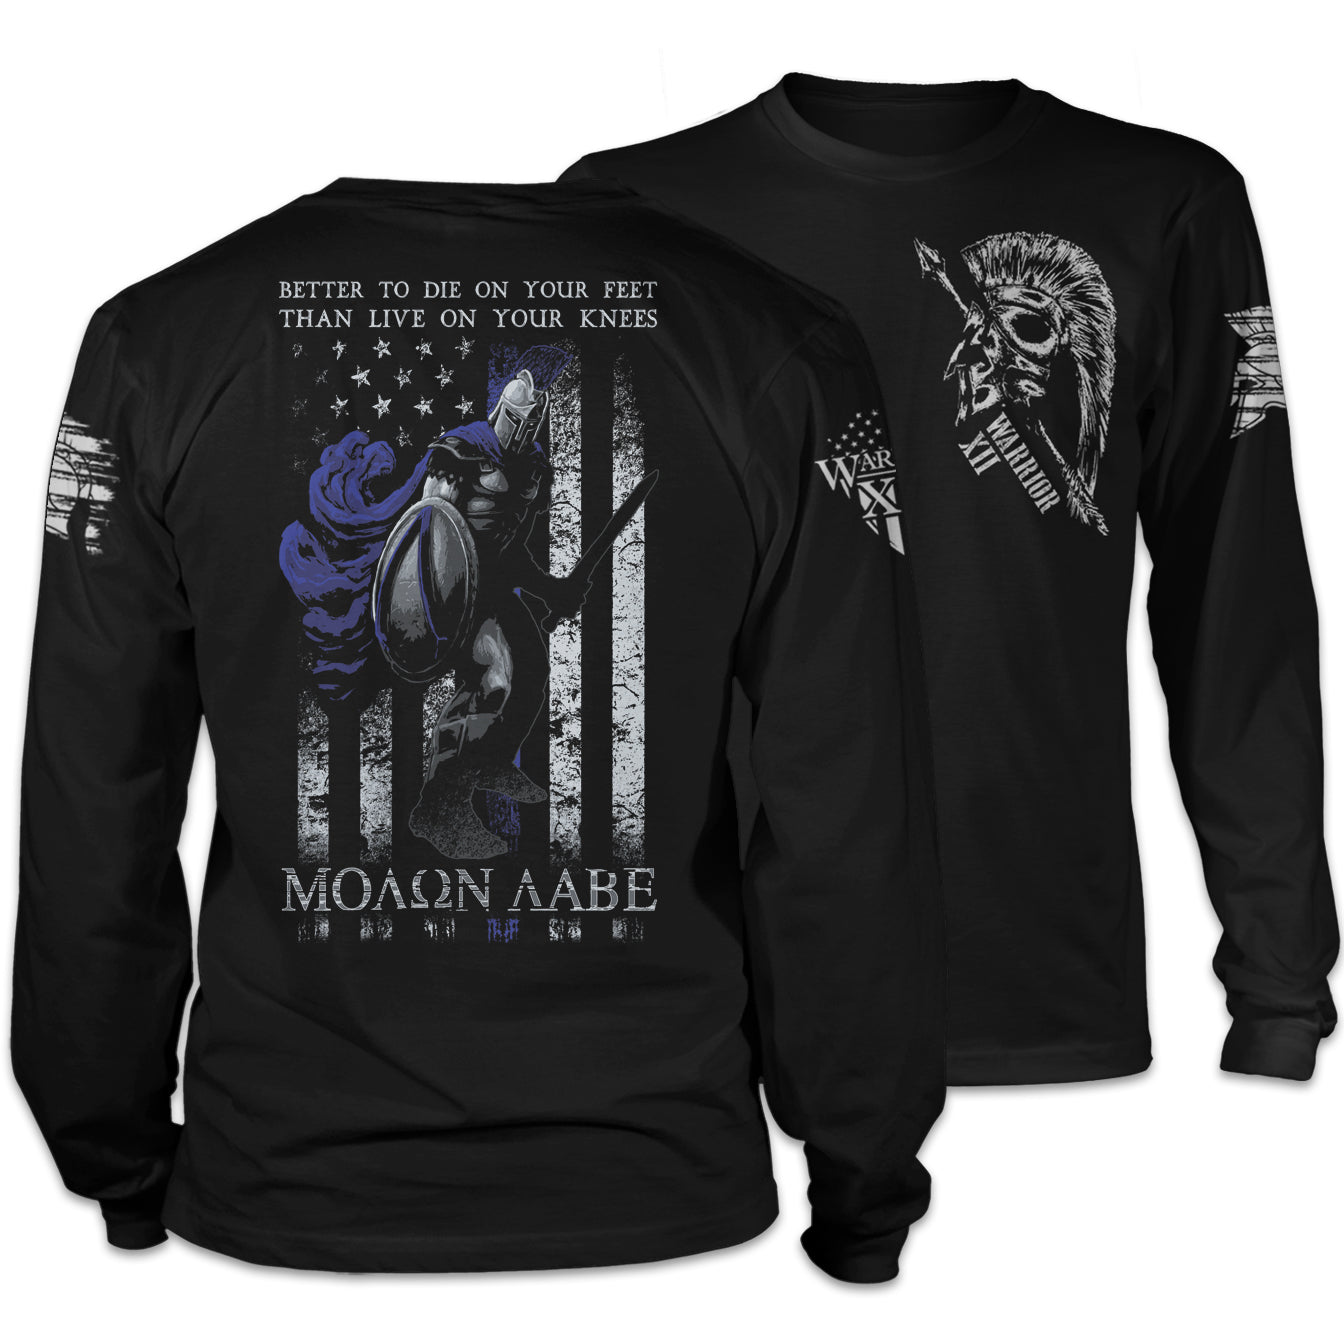 Front and back black long sleeve shirt thin blue line edition with the words "Better To Die On Your Feet Than Live On Your Knees, "MOLON LABE" with a spartan in front of the USA flag printed on the shirt.